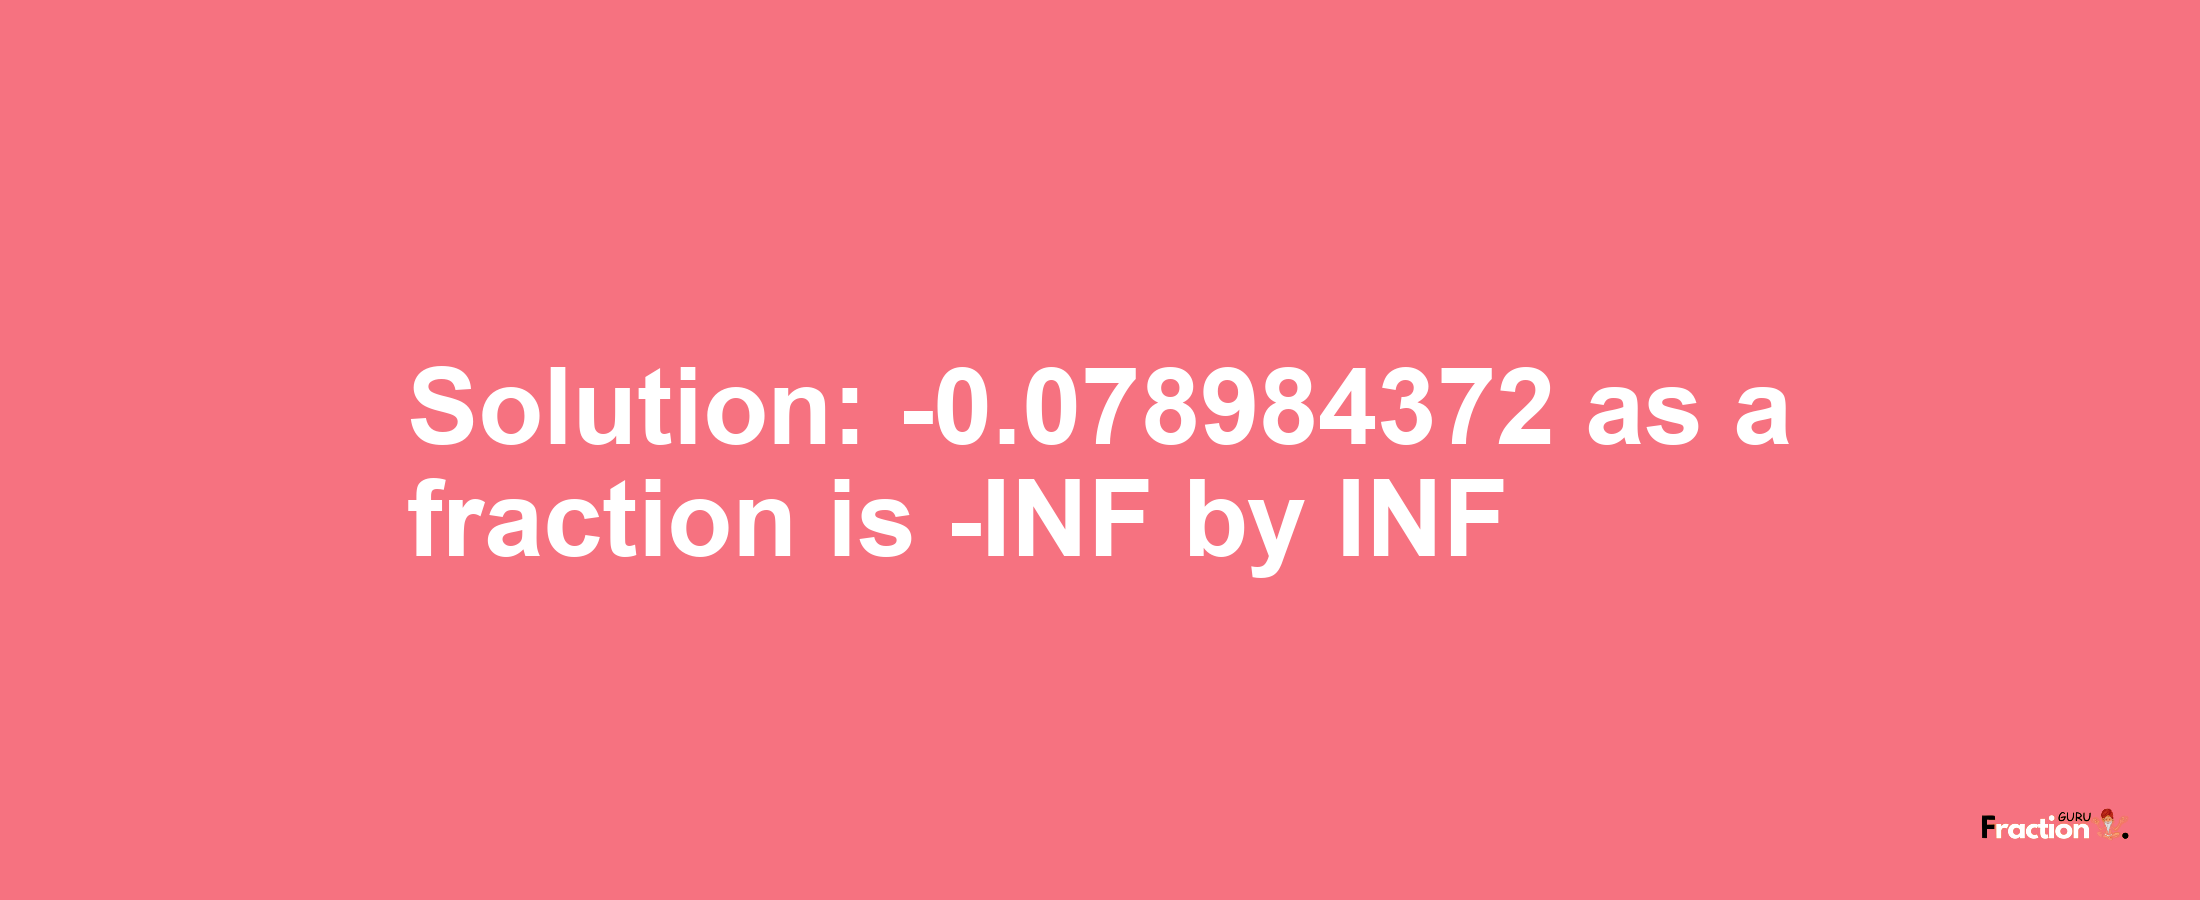 Solution:-0.078984372 as a fraction is -INF/INF